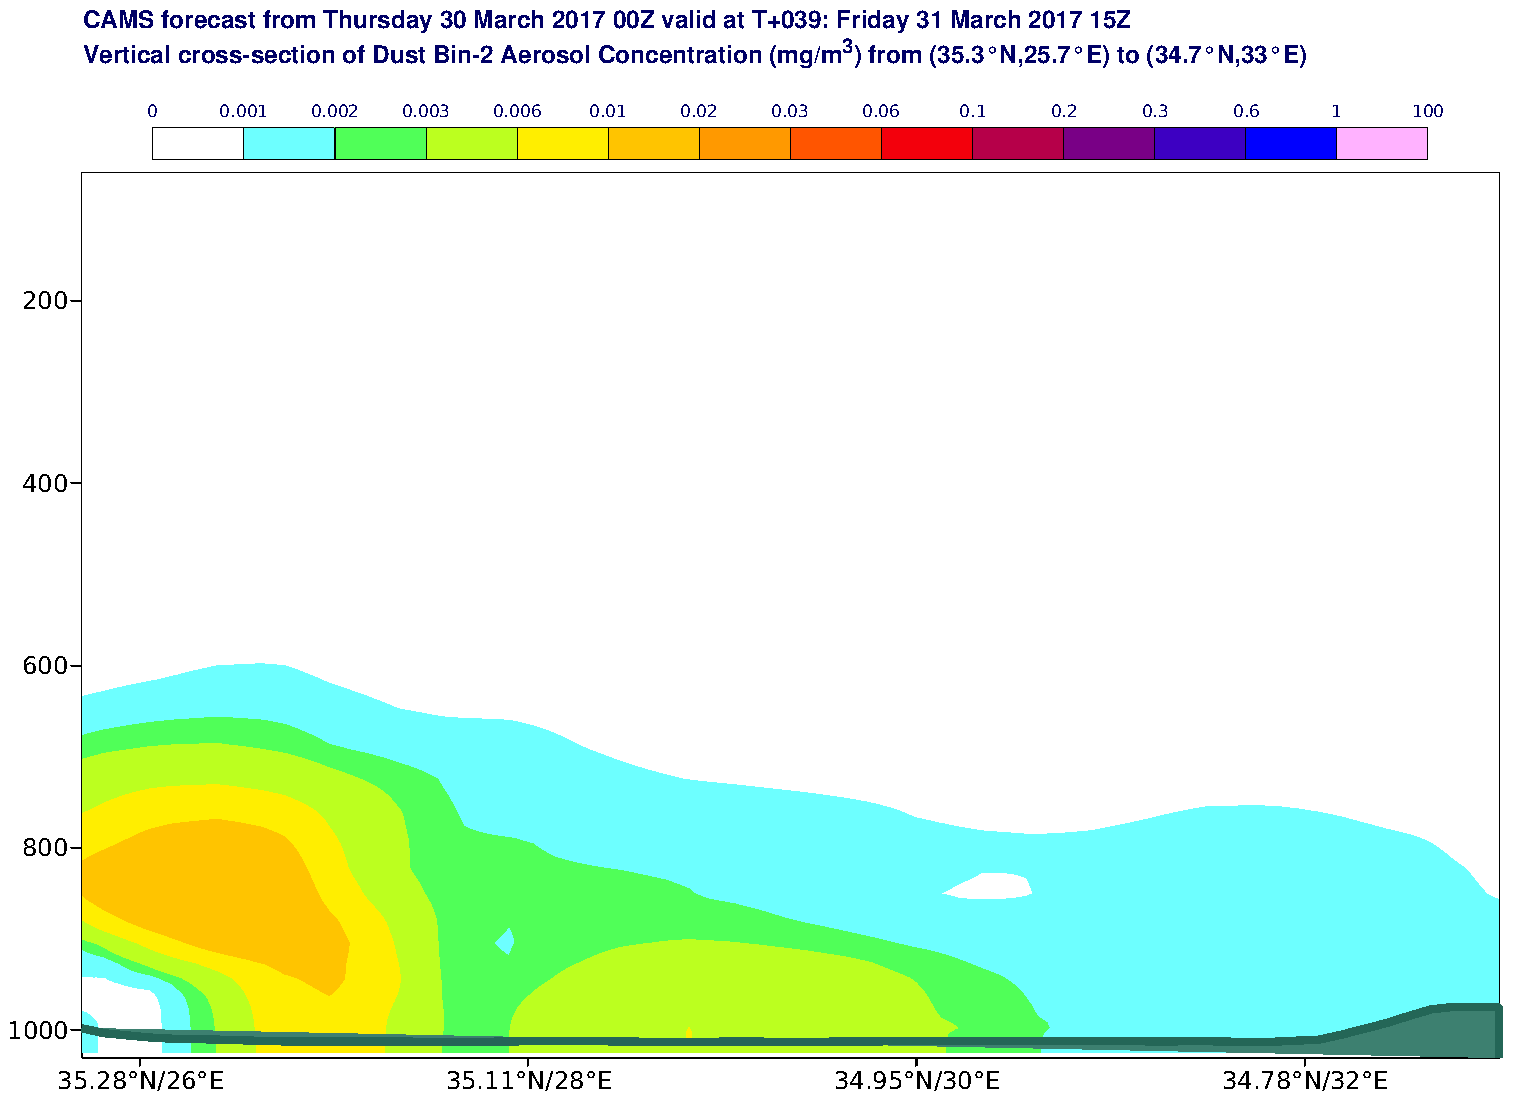 Vertical cross-section of Dust Bin-2 Aerosol Concentration (mg/m3) valid at T39 - 2017-03-31 15:00